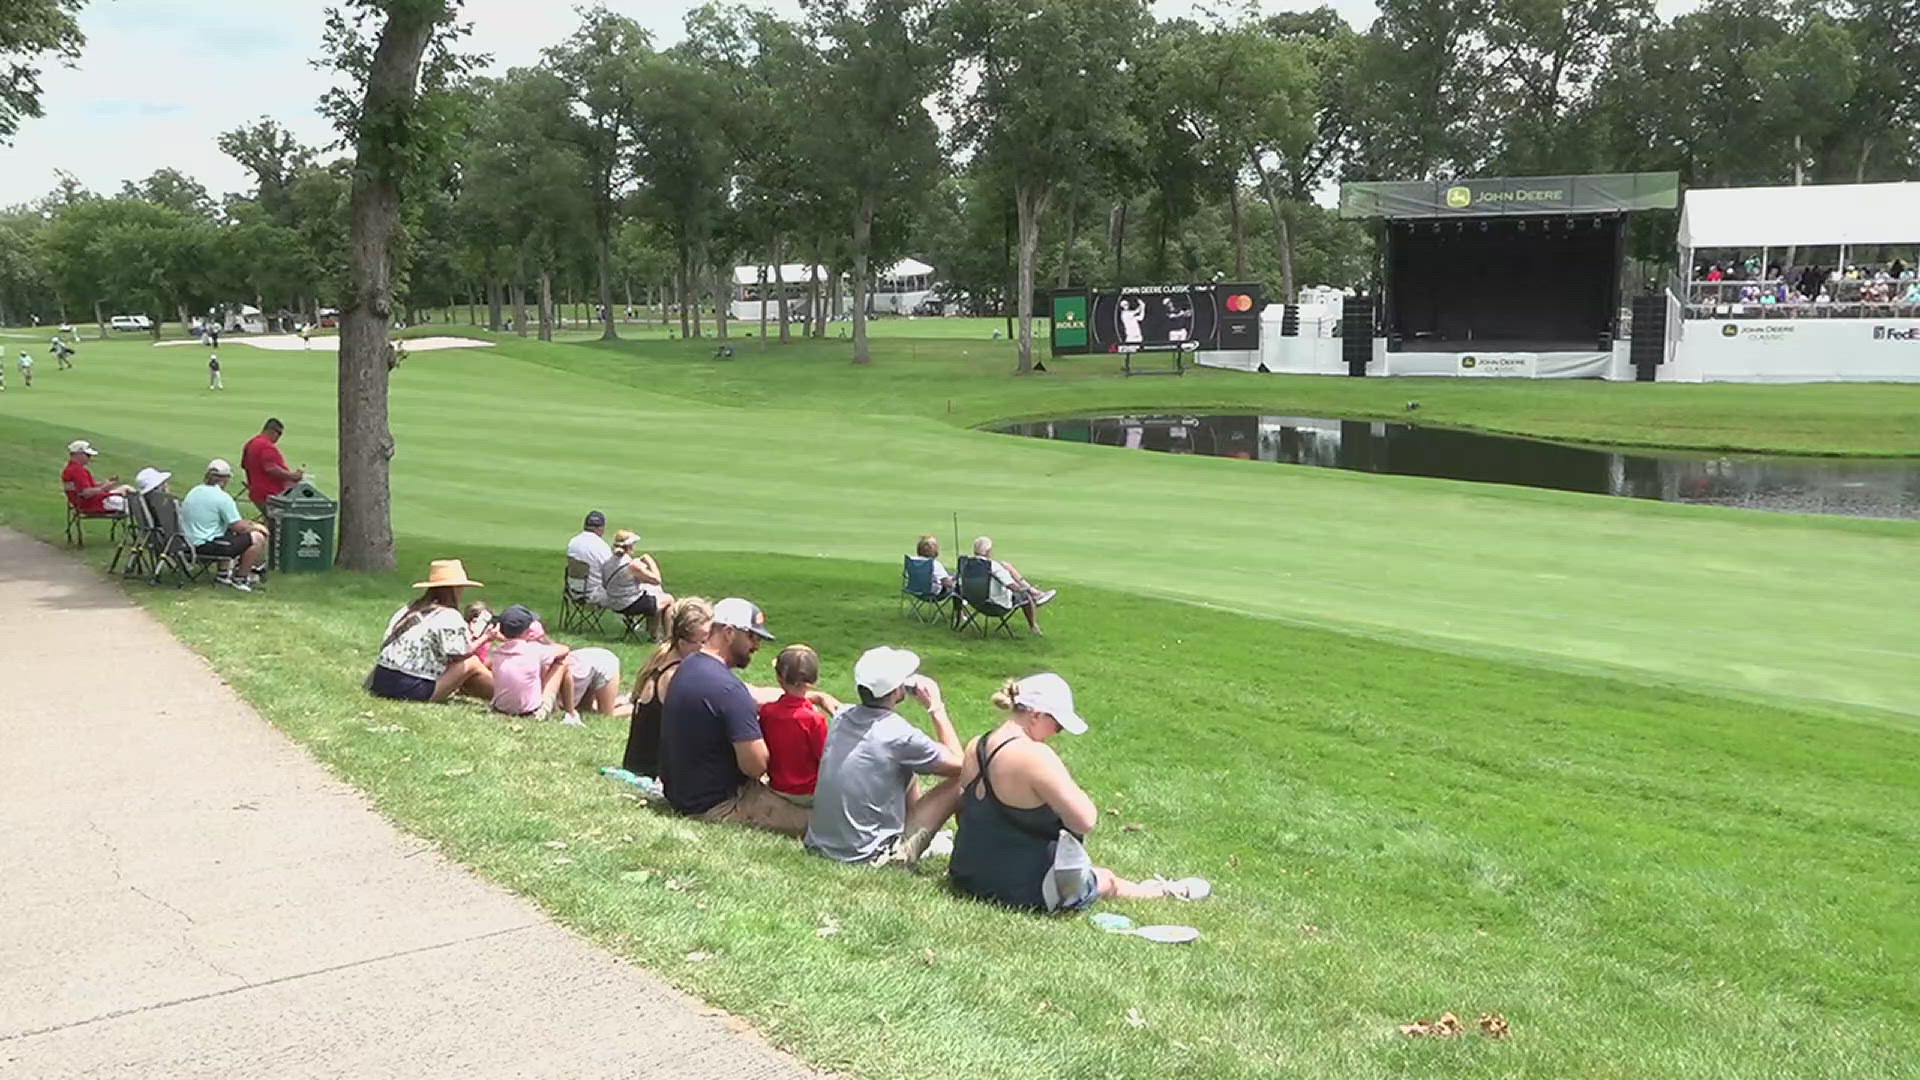 News 8's Ava Hedges explains how to make sure you're ready for the Counting Crows and Lainey Wilson concerts this weekend at TPC Deere Run.